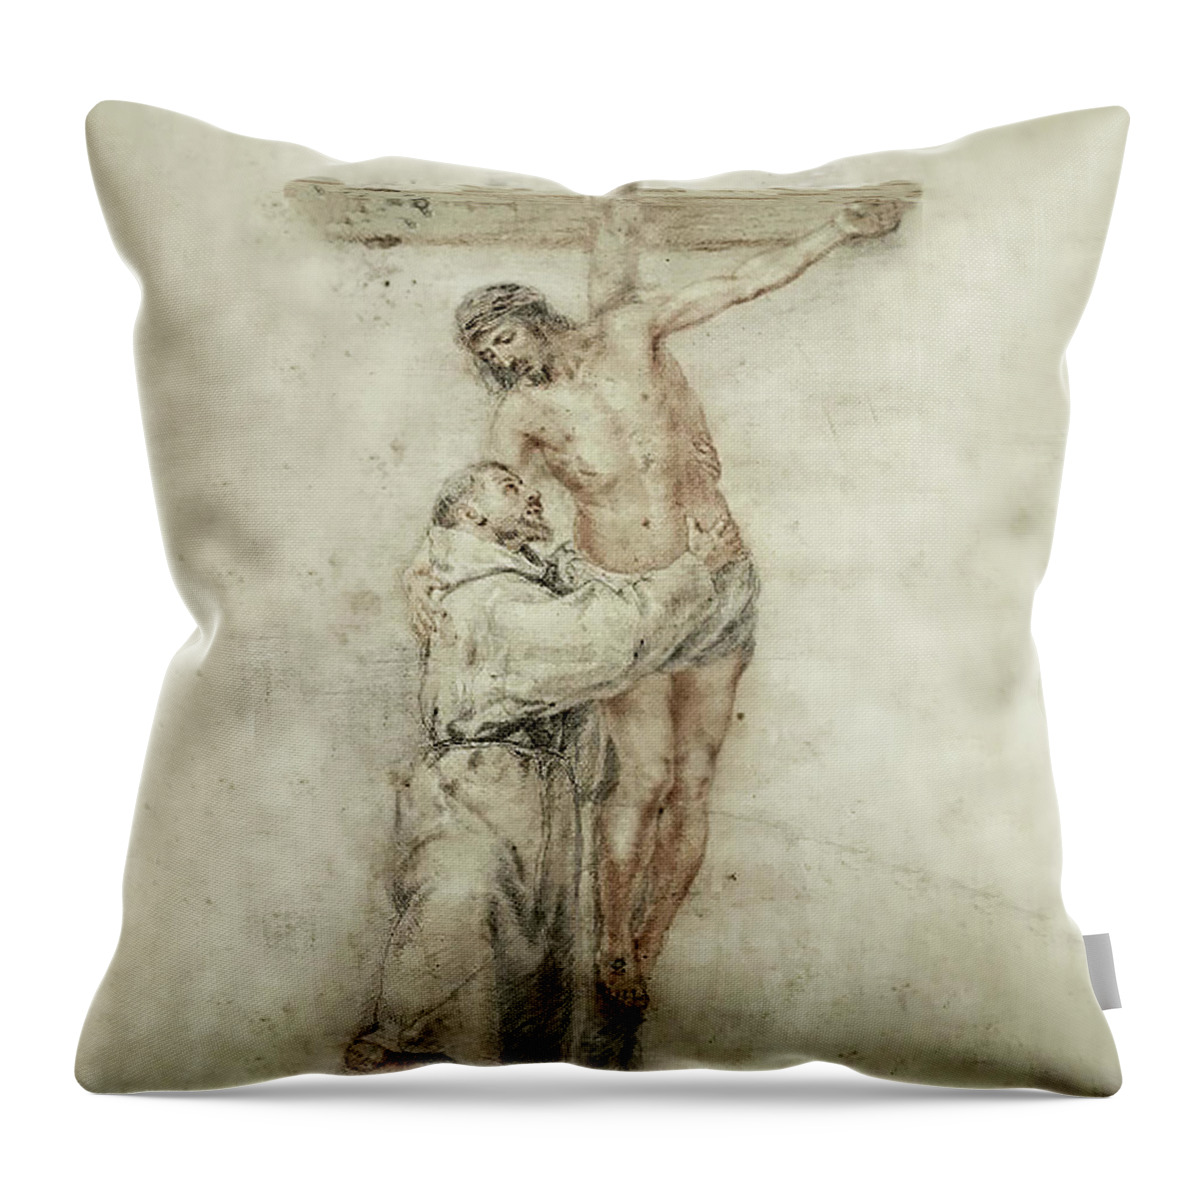 St. Francis Rejecting The World And Embracing Christ Throw Pillow featuring the digital art St. Francis Embracing Christ by Bartolome Esteban Murillo